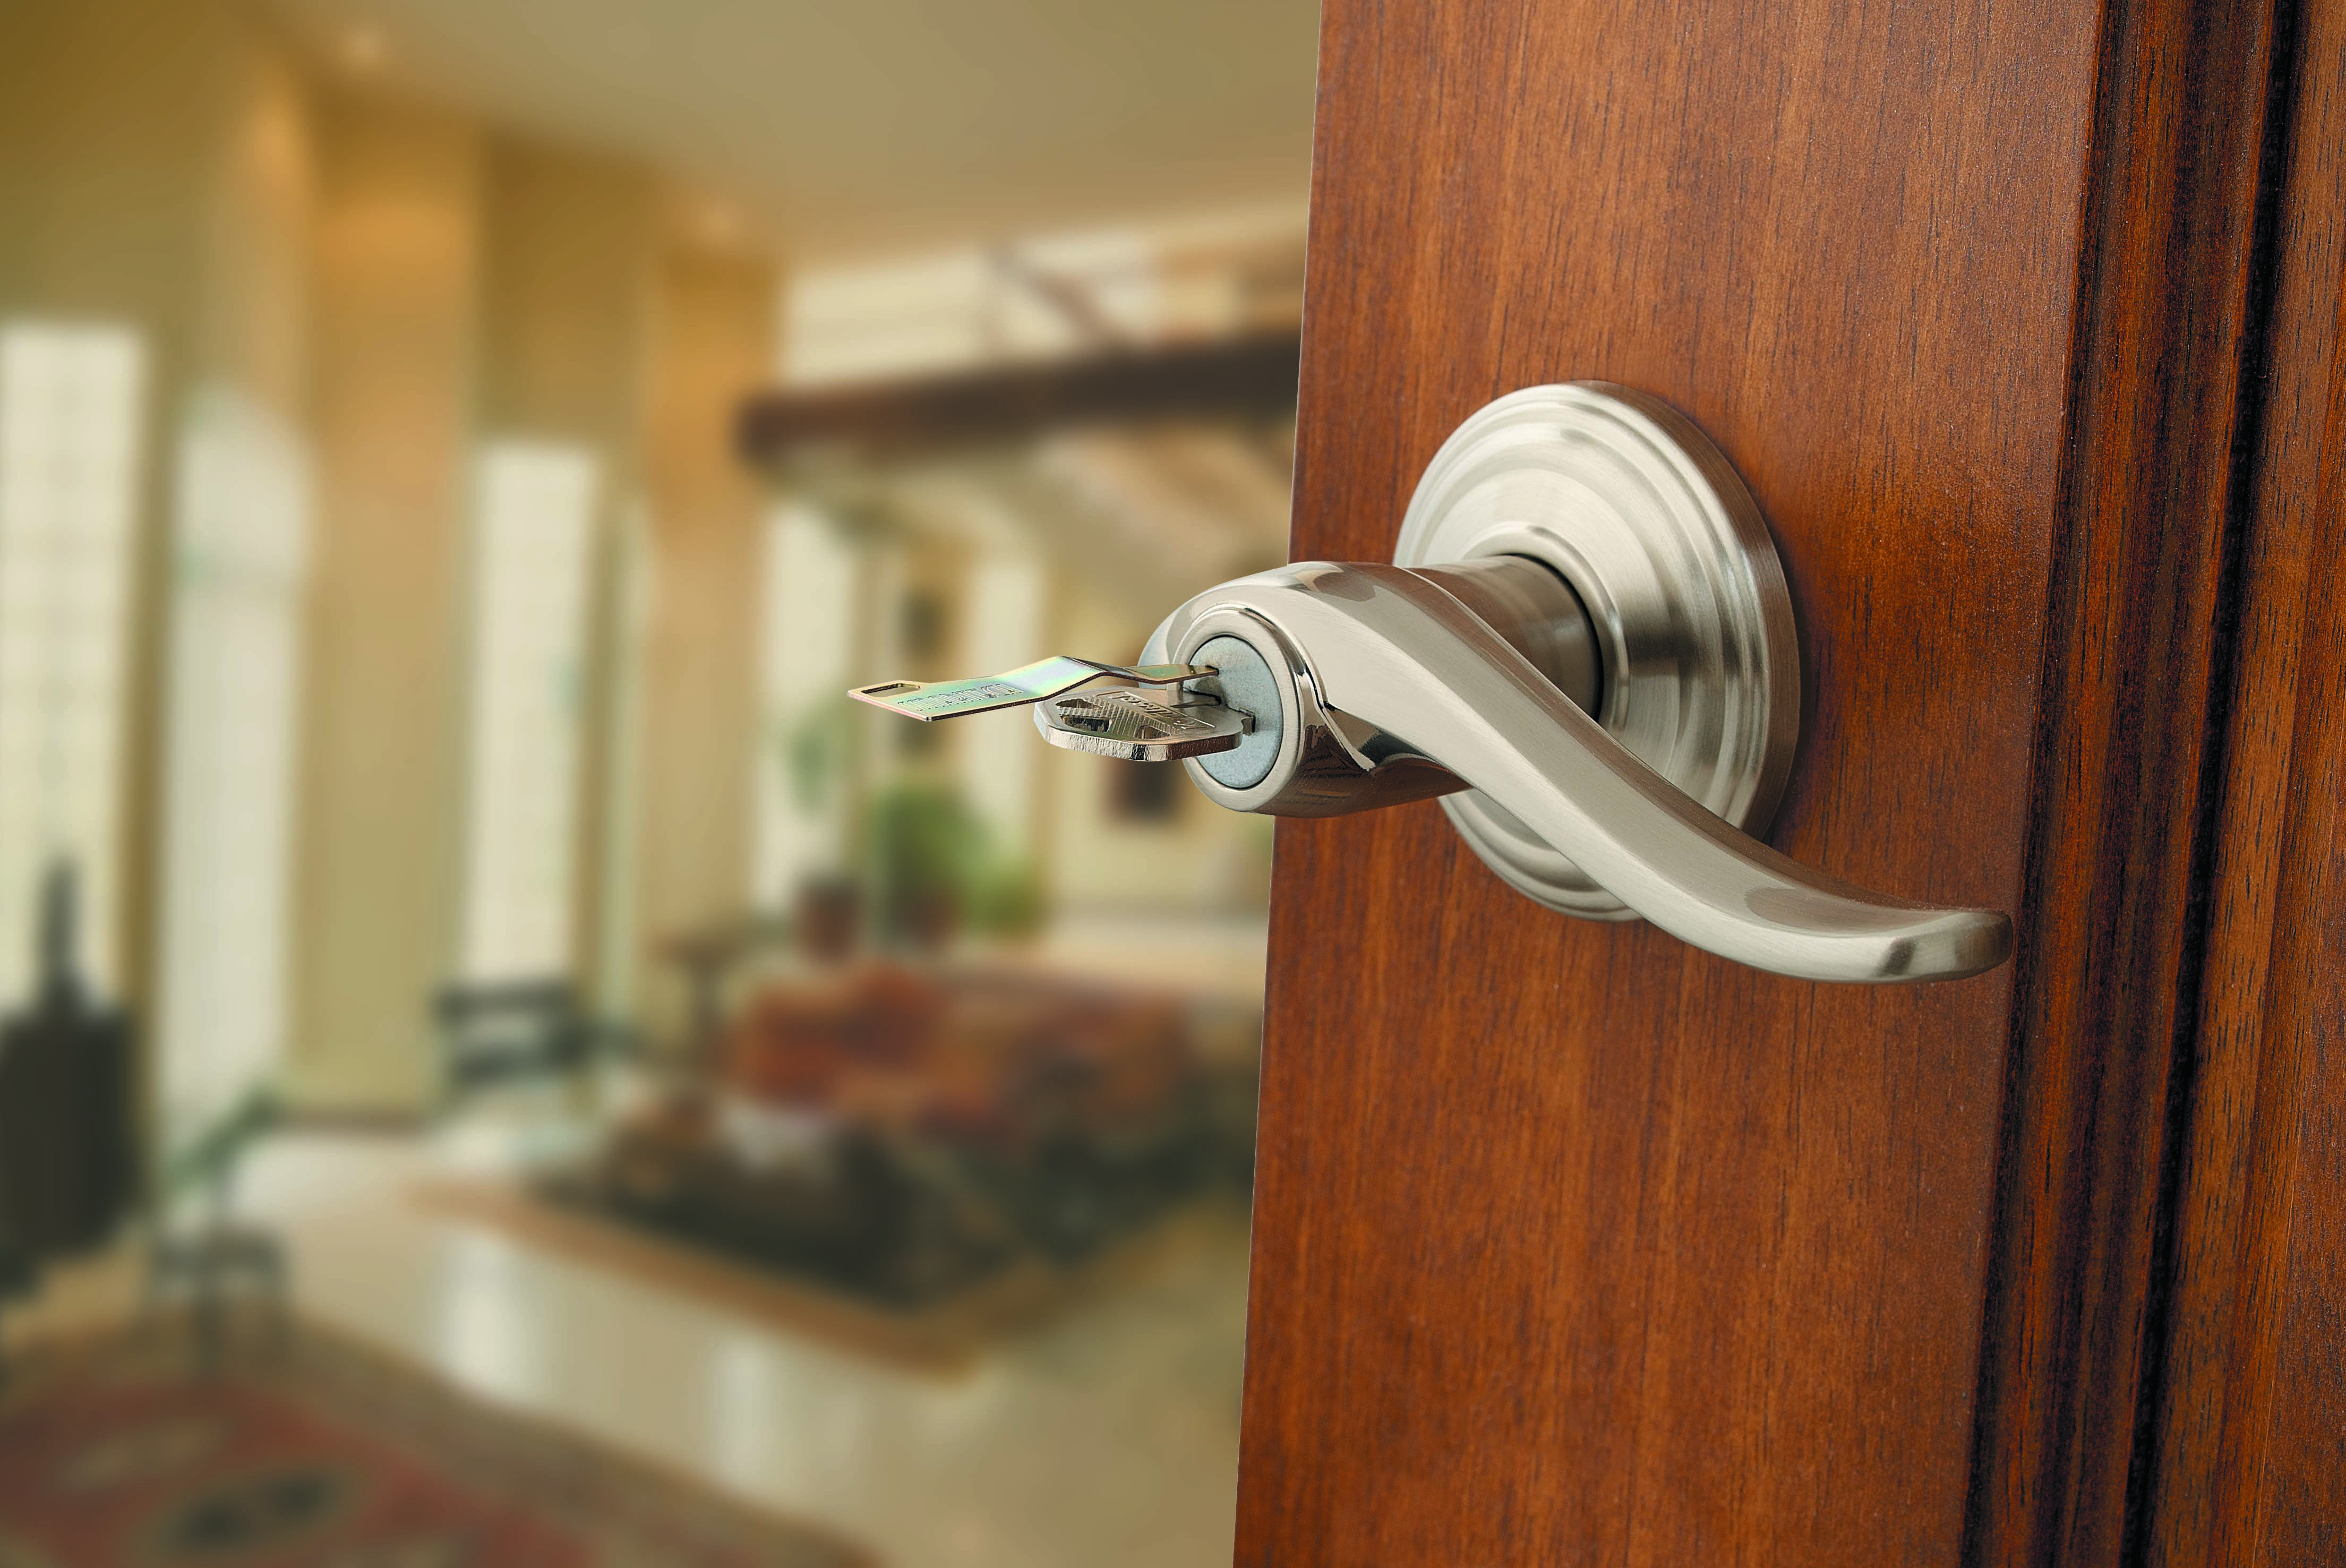 4 Crucial Signs that your Locks have been Compromised